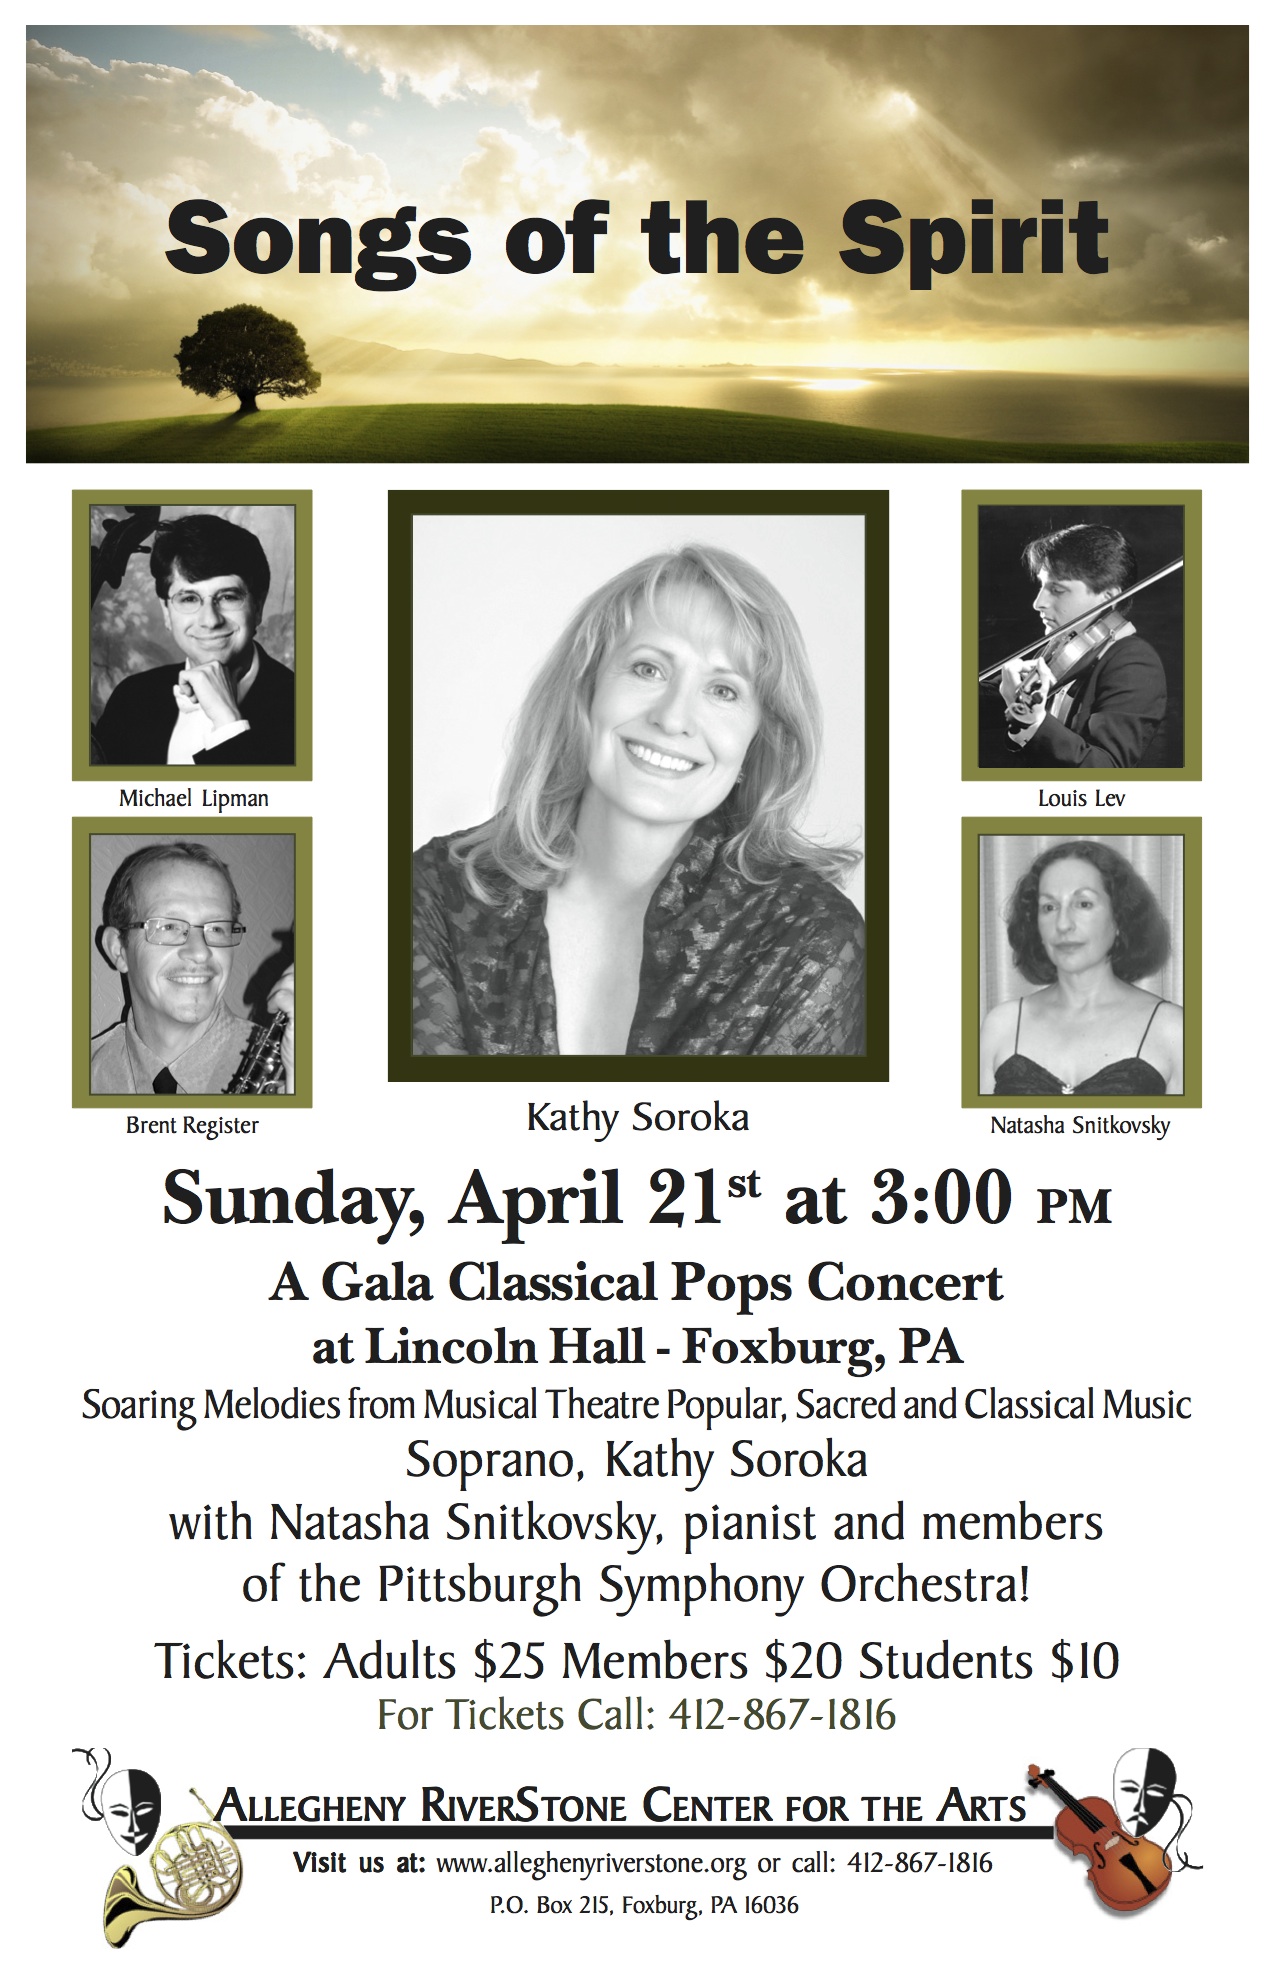 Songs of the Spirit Classical Pops Concert – April 21